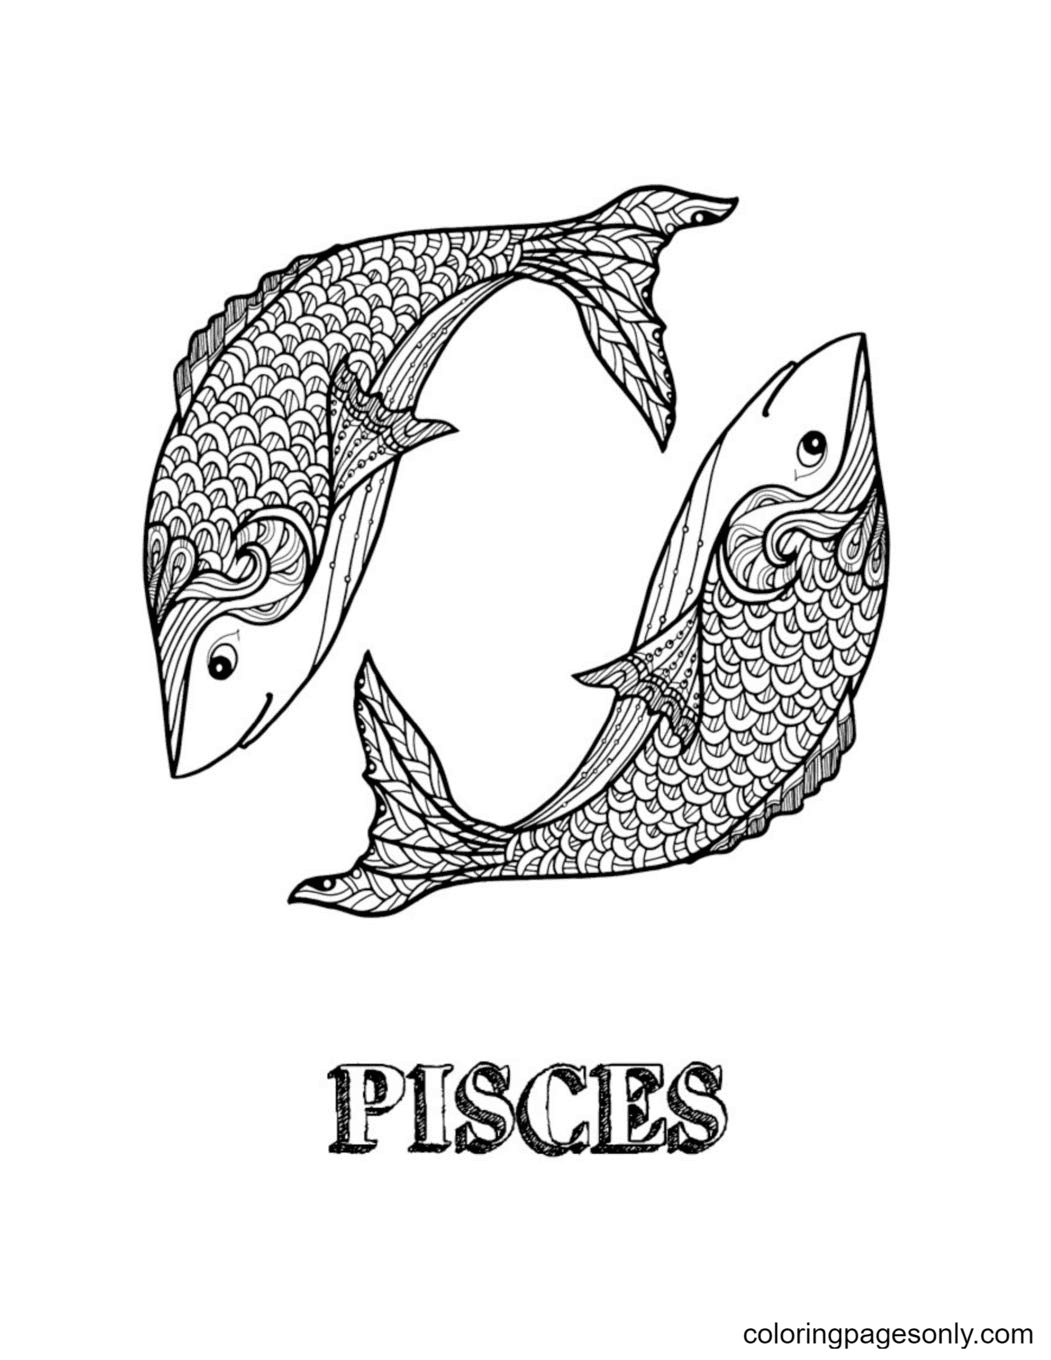 Pisces Free Coloring Pages